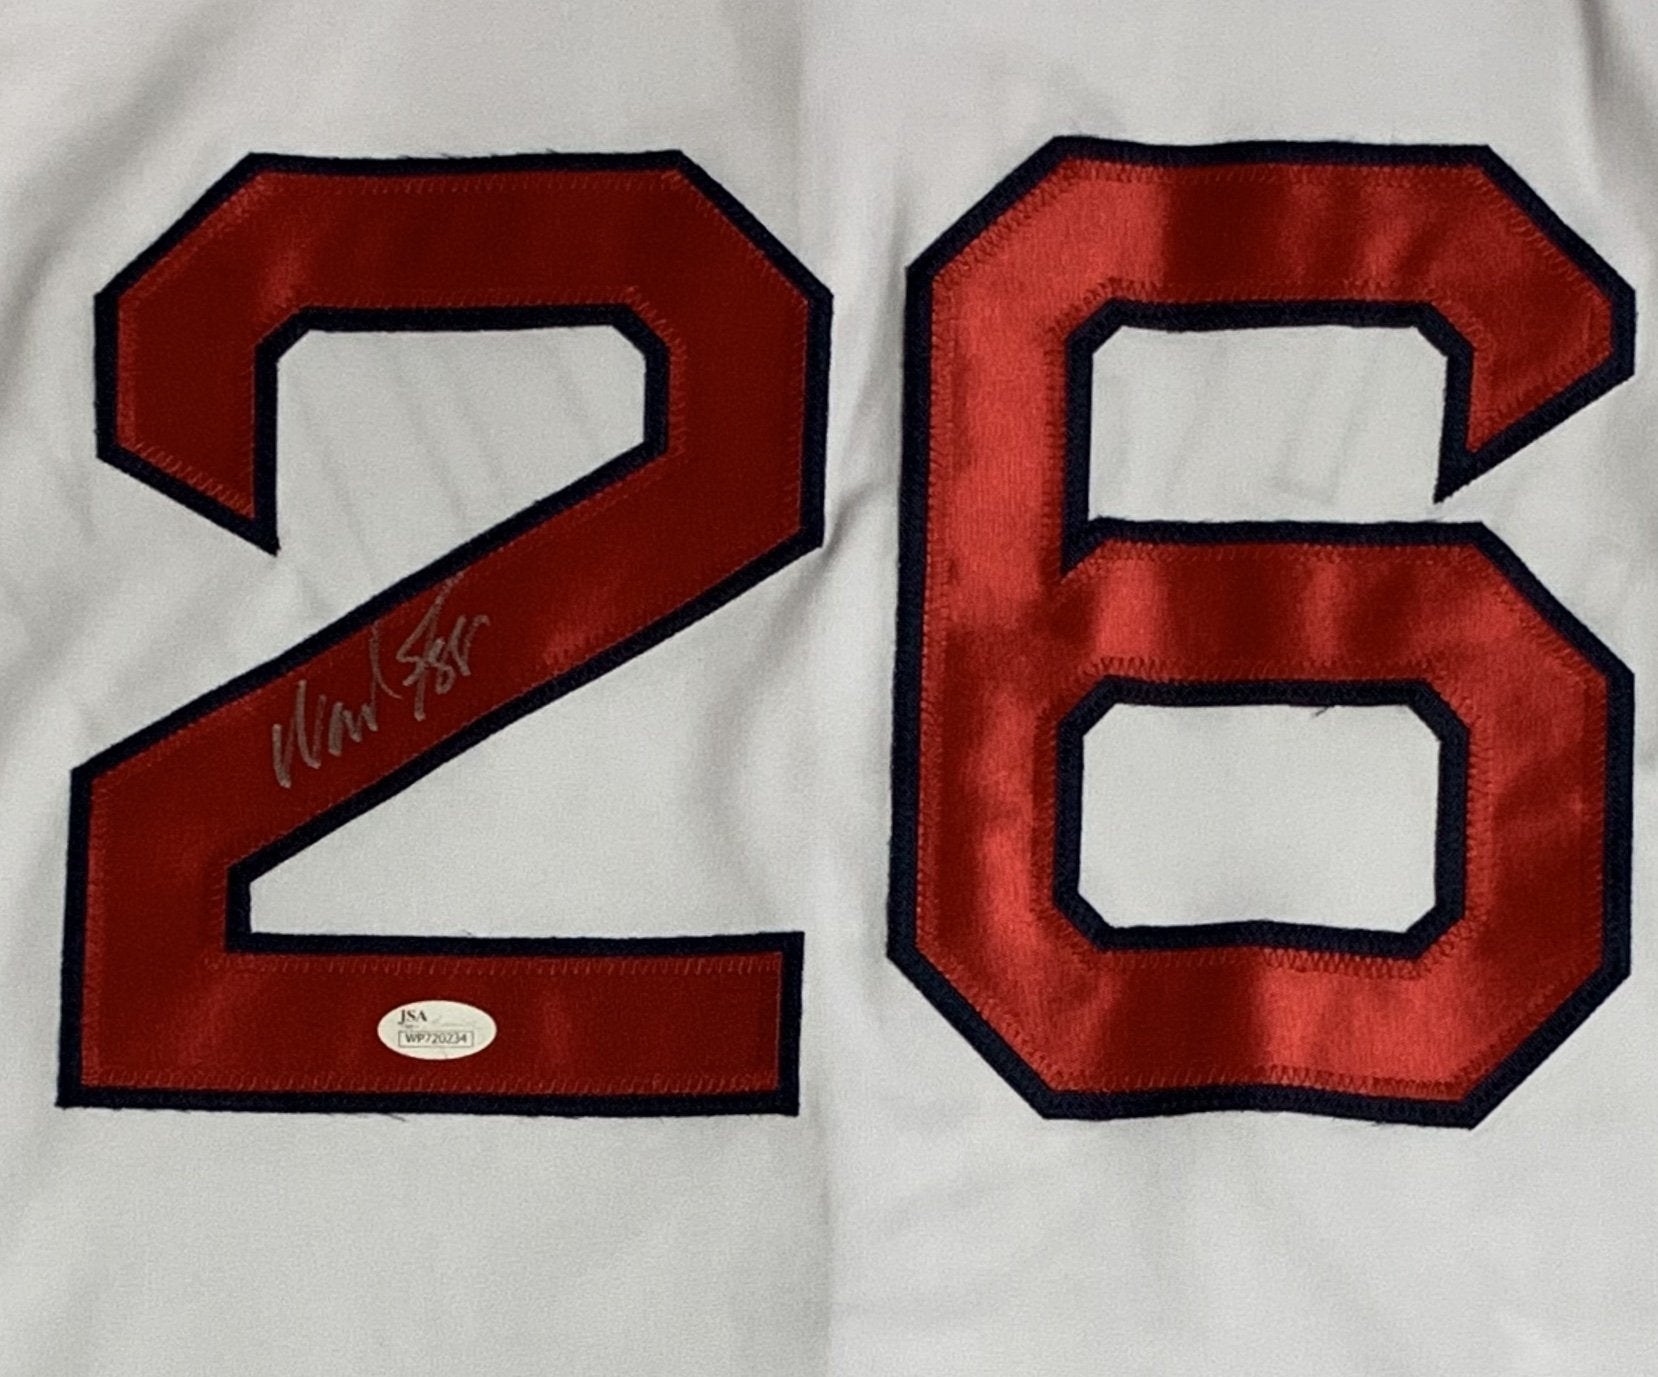 Wade Boggs New York Yankees Autographed White Nike Replica Jersey with HOF  05 Inscription